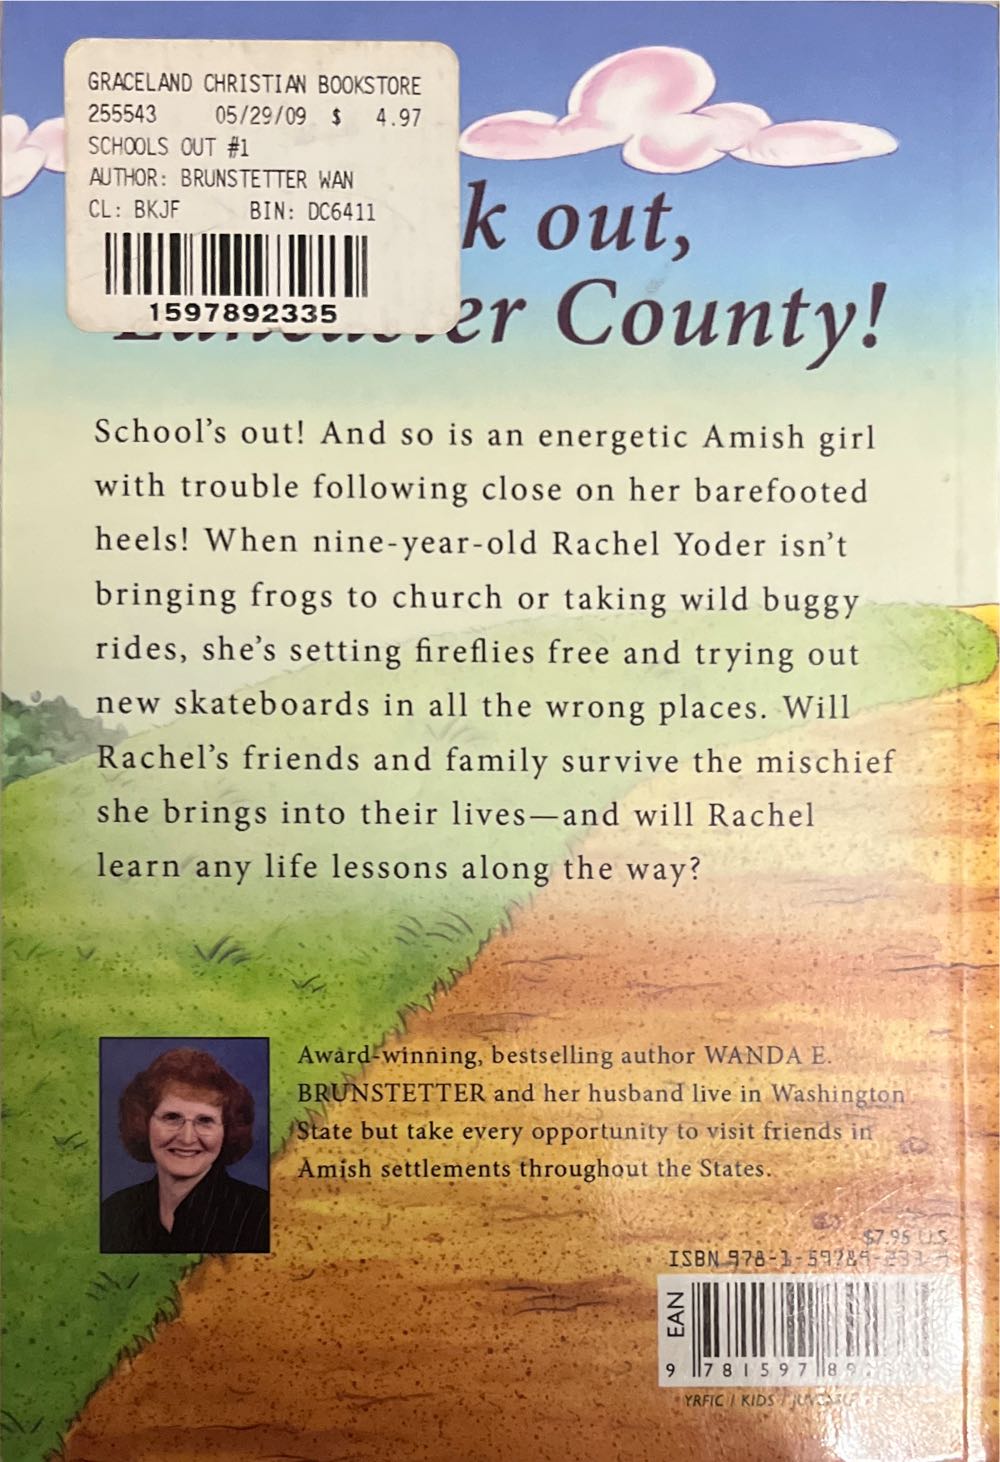 School’s Out! - Wanda E. Brunstetter (Barbour Books - Paperback) book collectible [Barcode 9781597892339] - Main Image 2